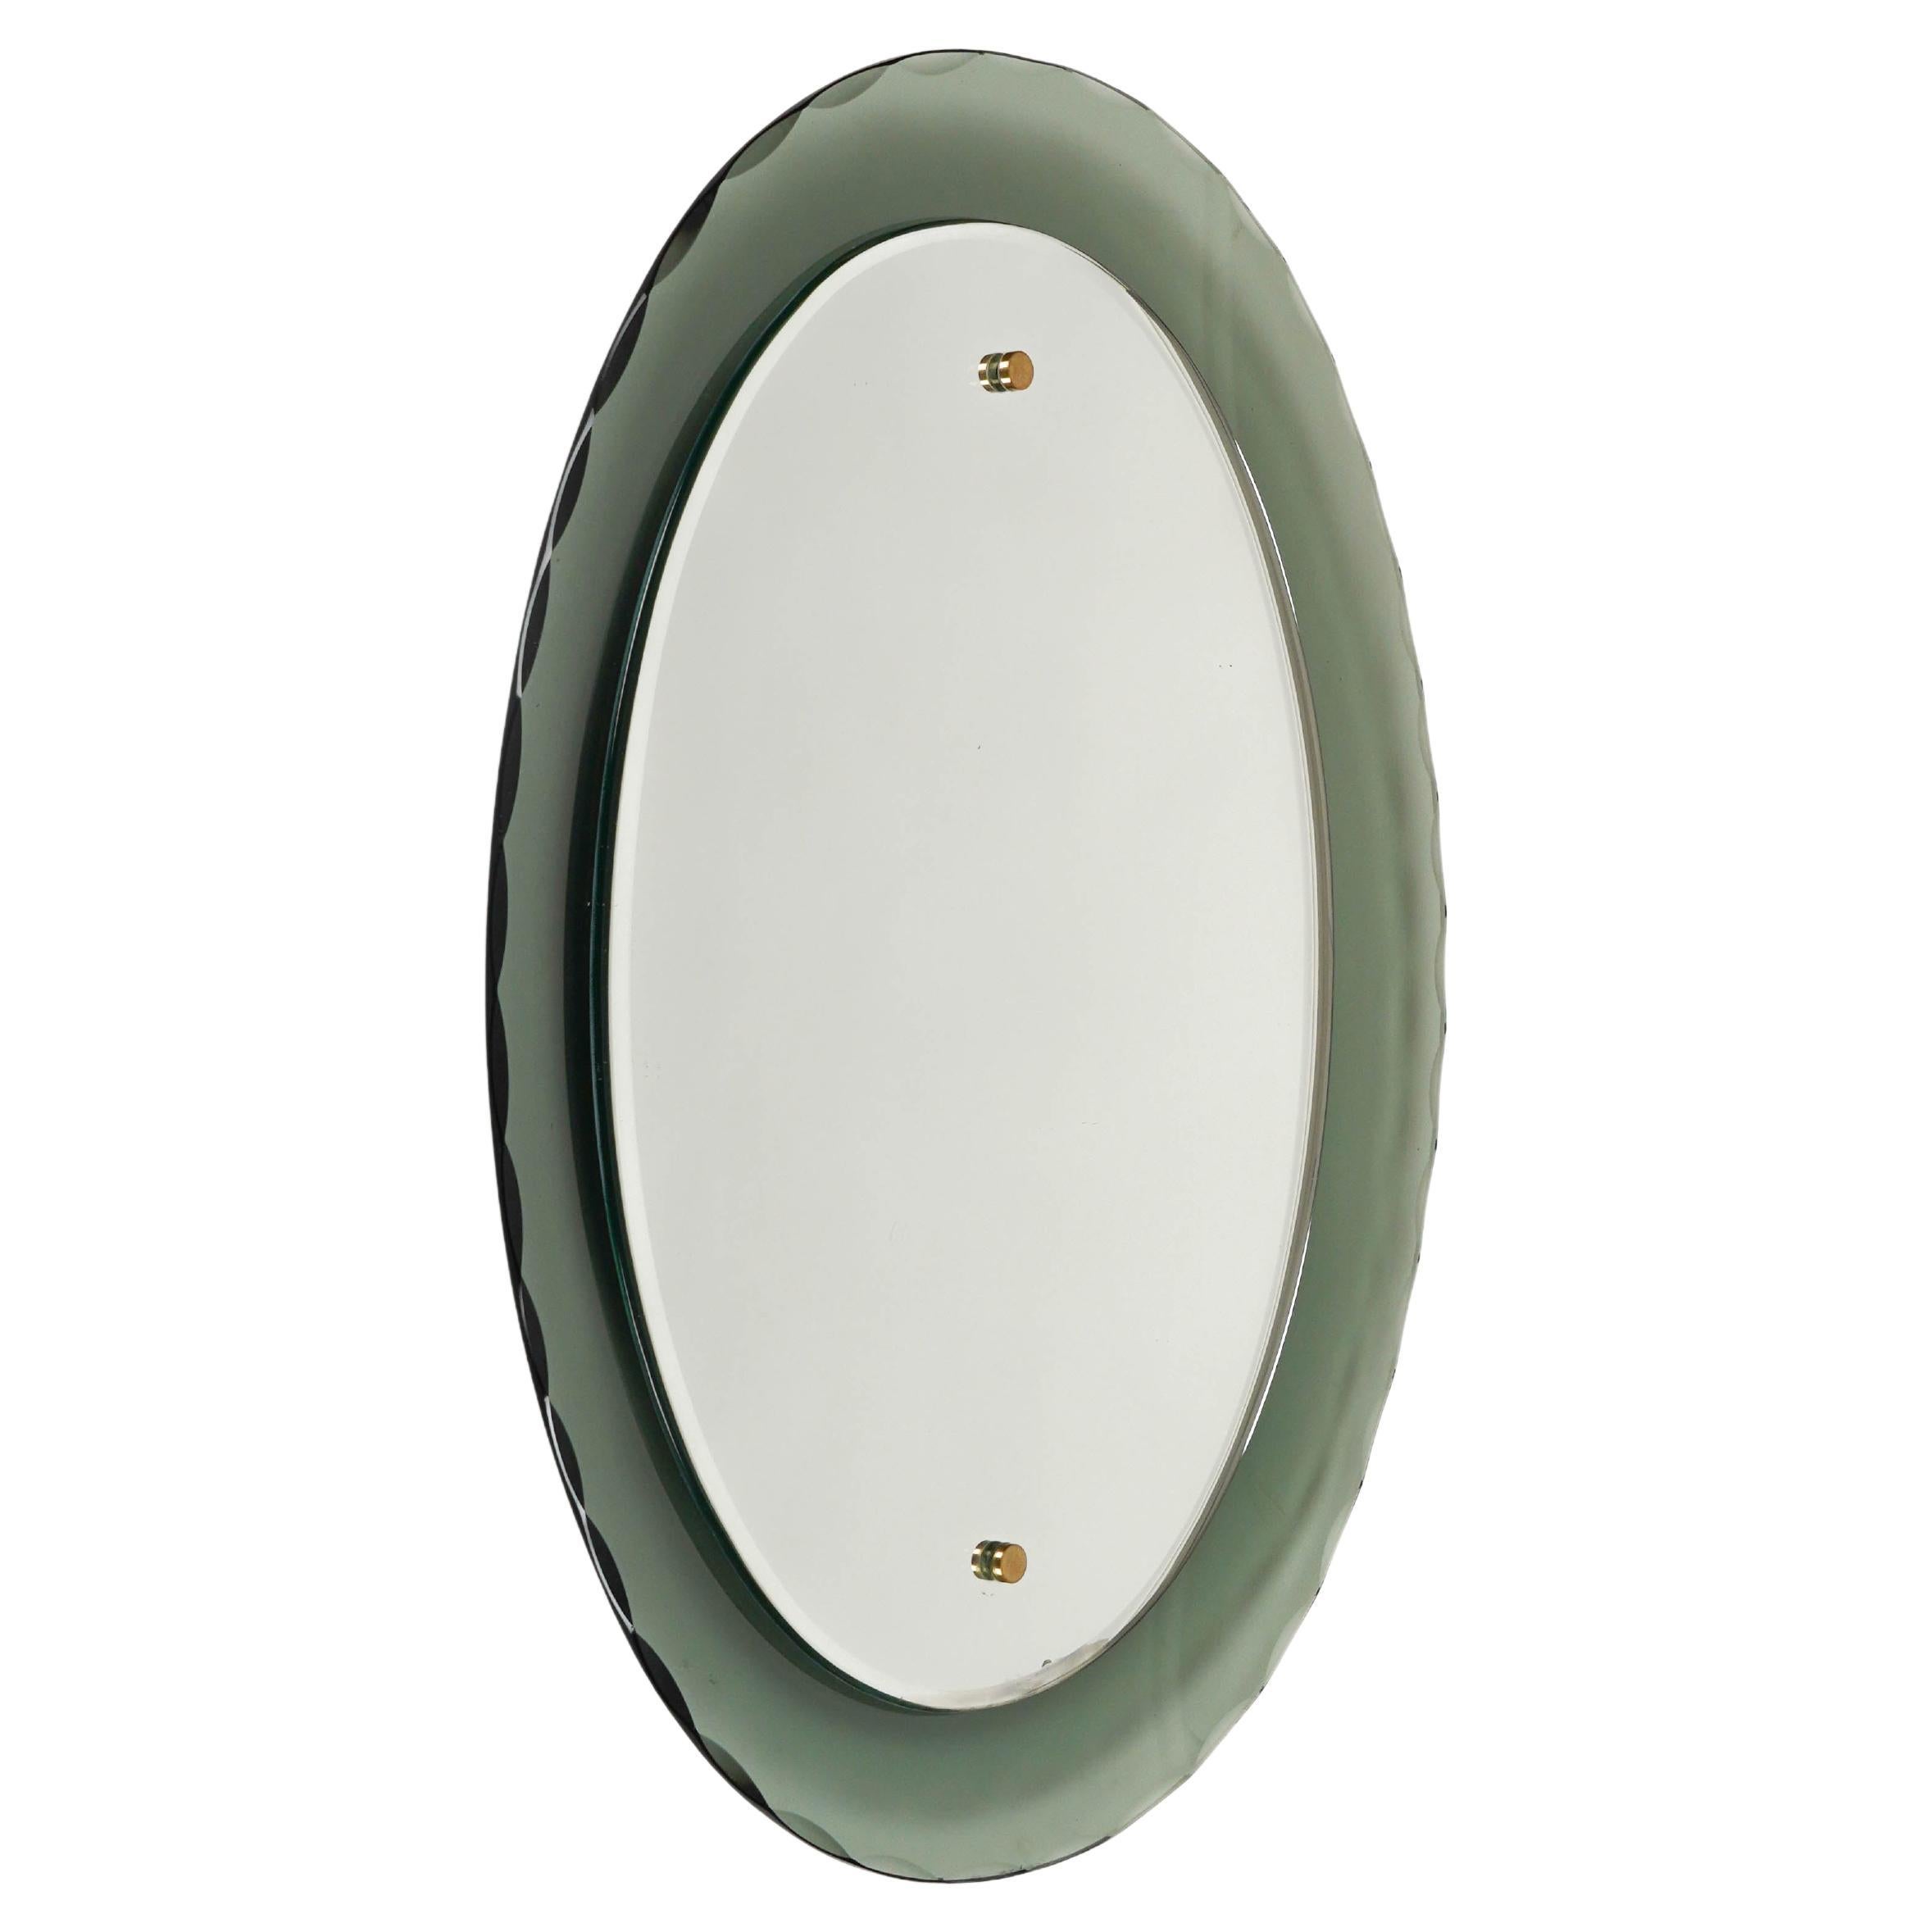 Midcentury Oval Wall Mirror whit Smoked Glass Frame by Cristal Arte, Italy 1960s For Sale